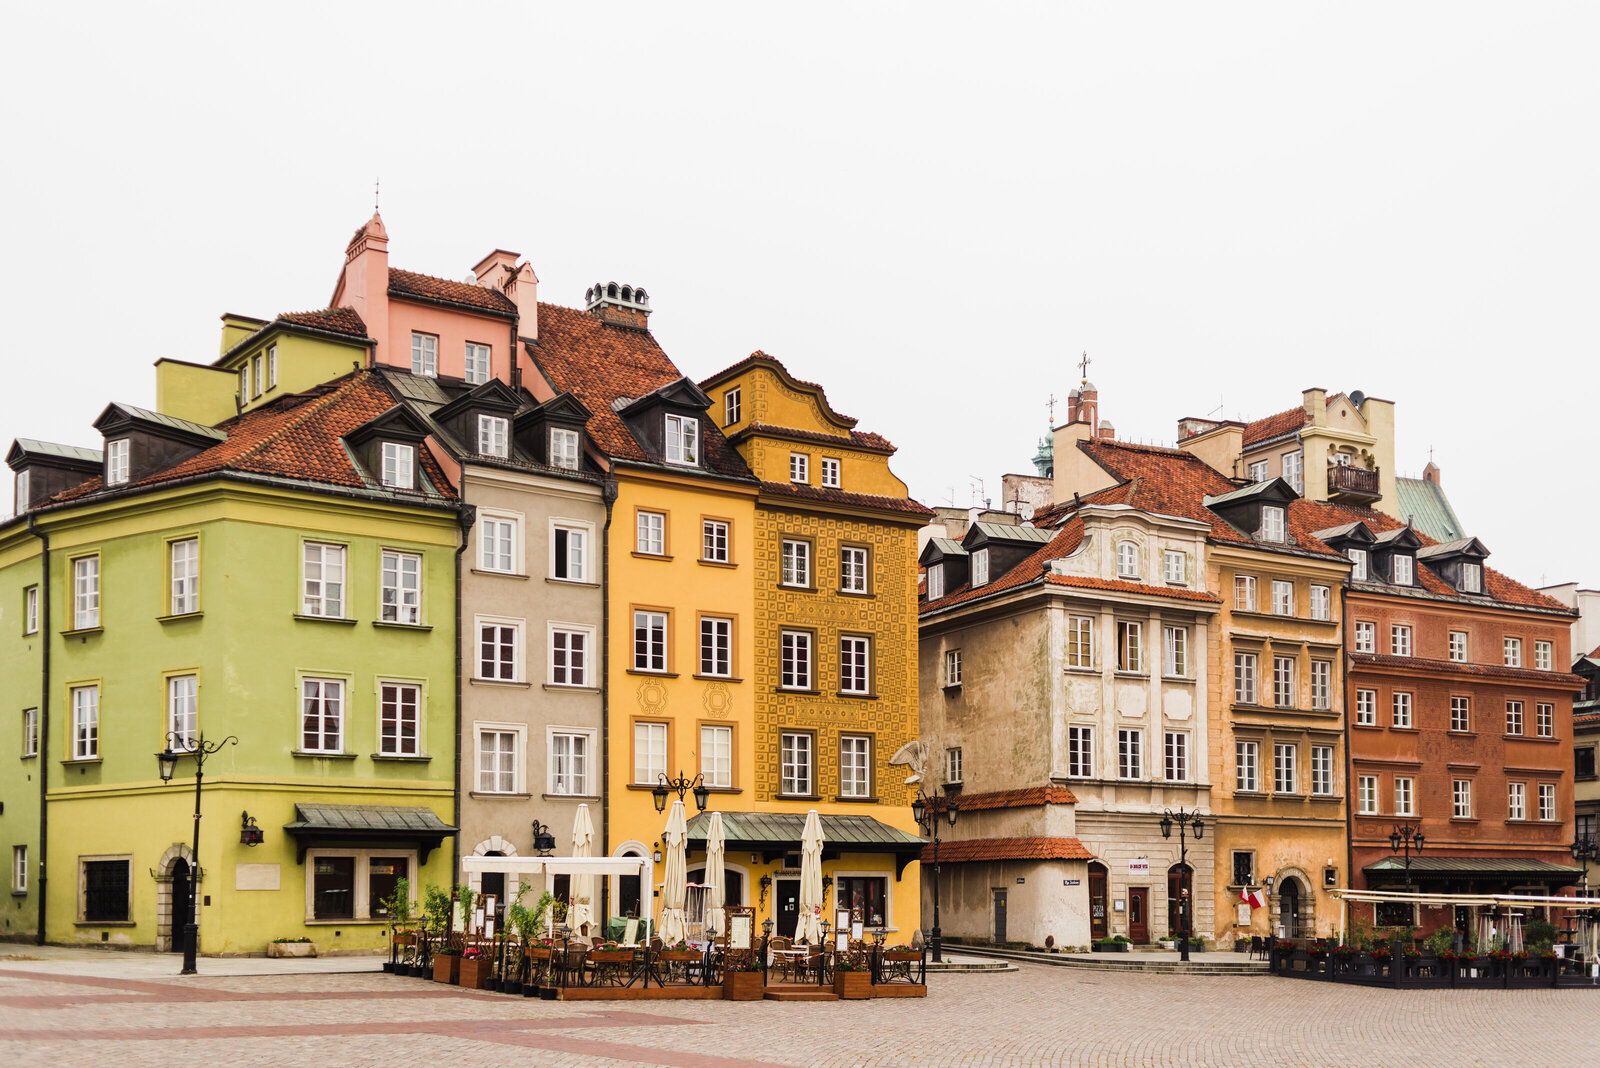 Colorful buildings in the square of Warsaw